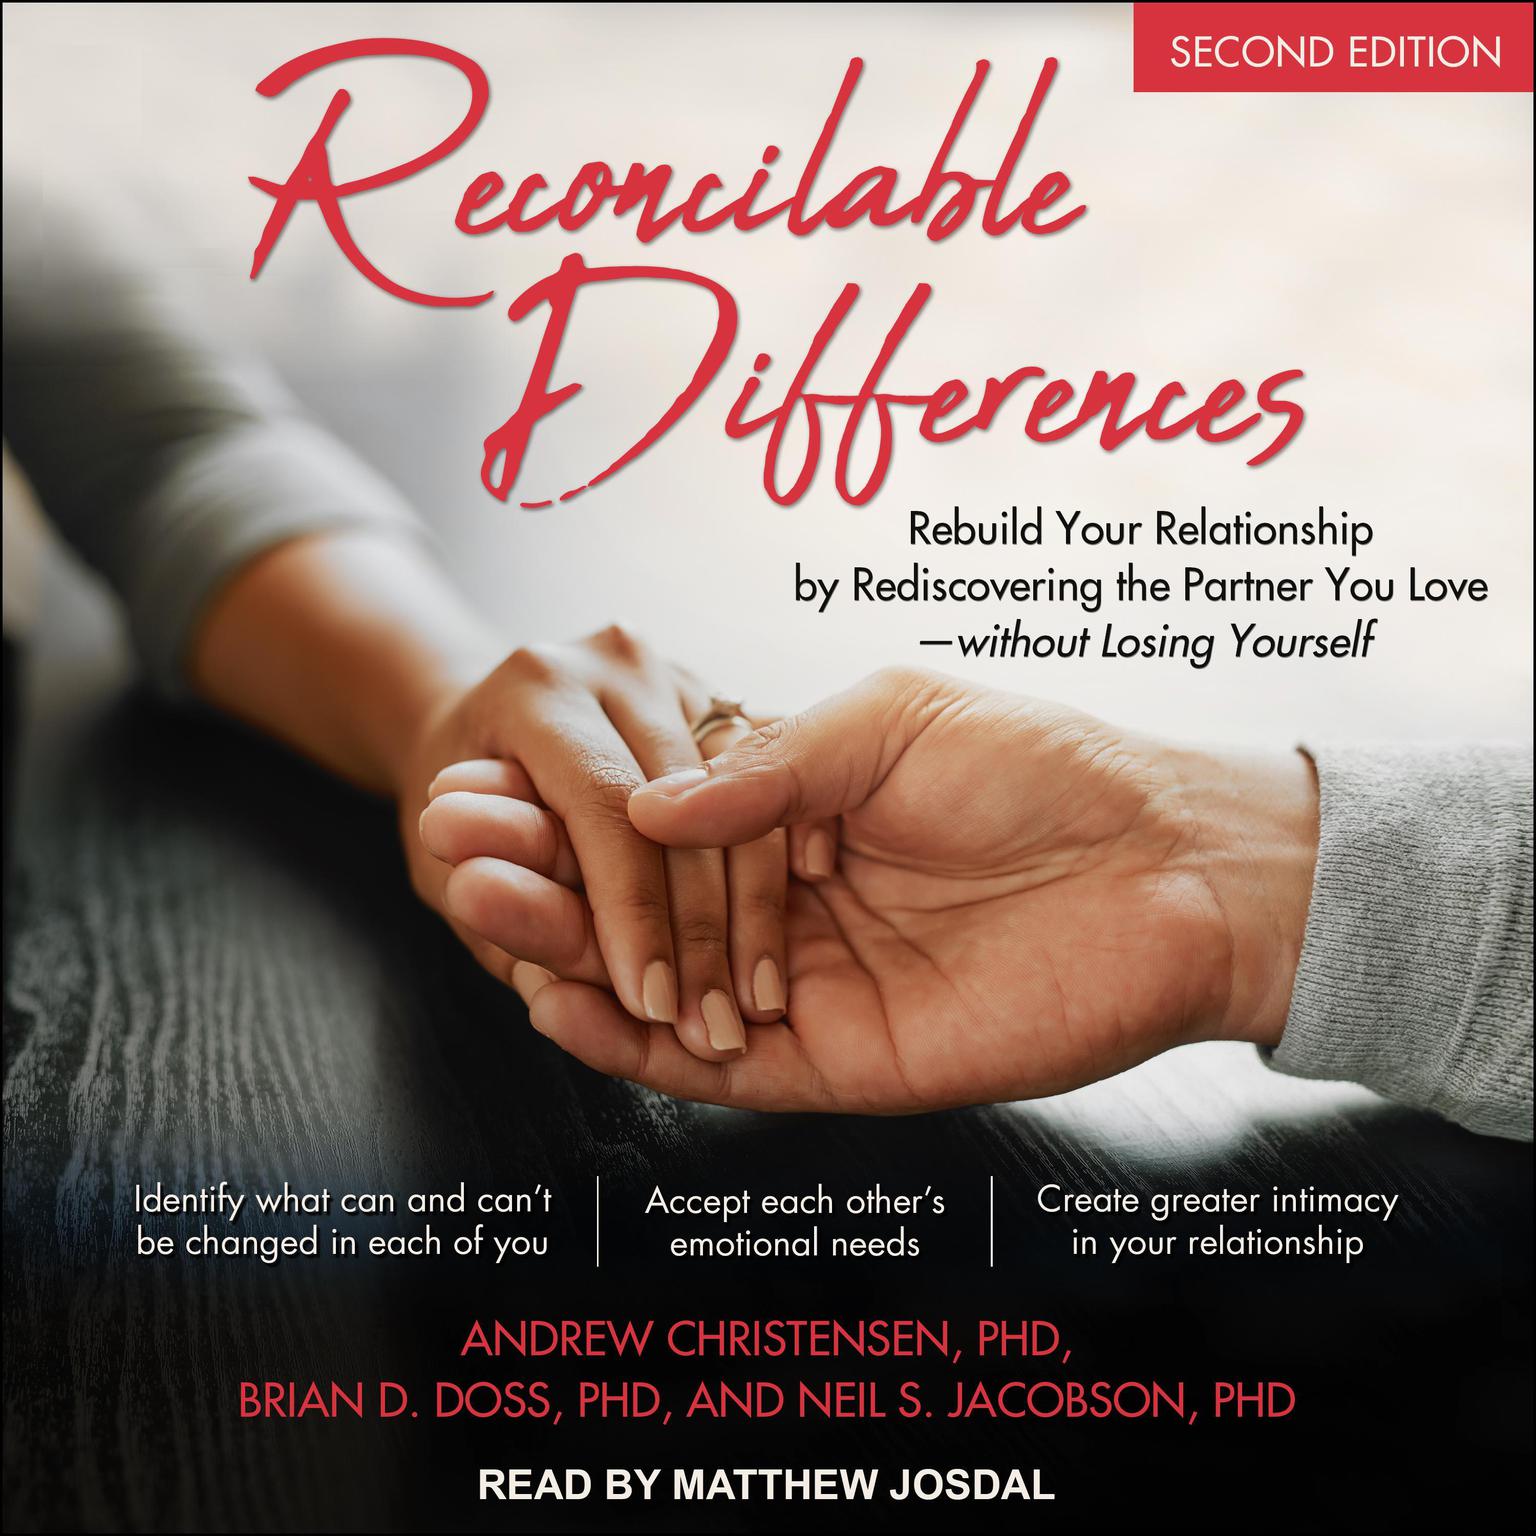 Reconcilable Differences, Second Edition: Rebuild Your Relationship by Rediscovering the Partner You Love-without Losing Yourself Audiobook, by Andrew Christensen